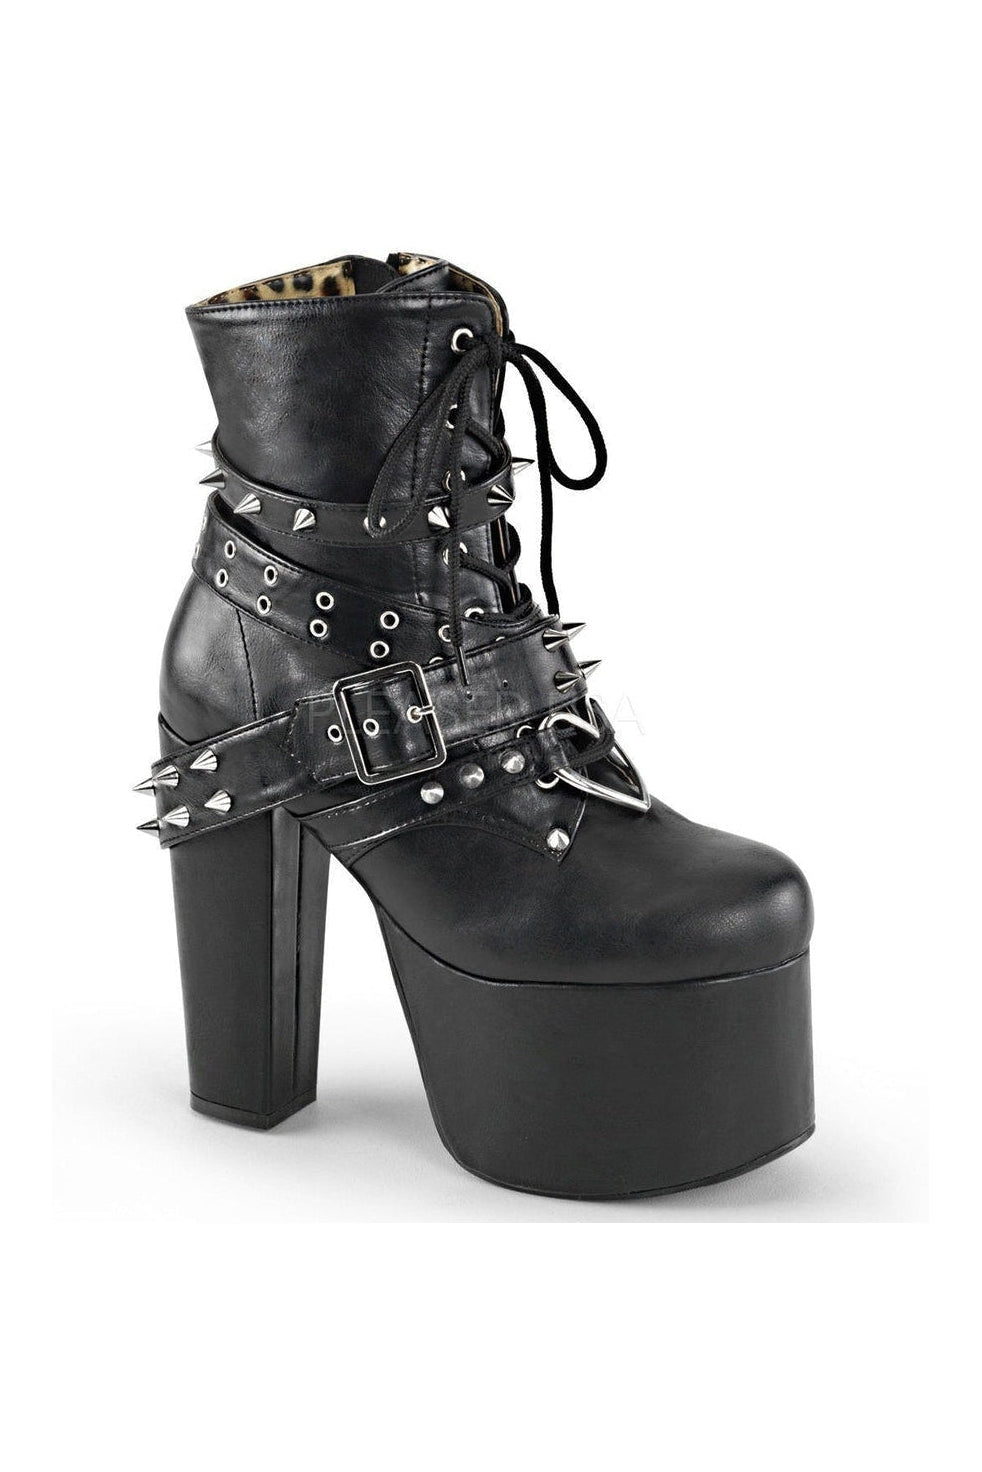 TORMENT-700 Demonia Ankle Boot | Black Faux Leather-Demonia-Black-Ankle Boots-SEXYSHOES.COM